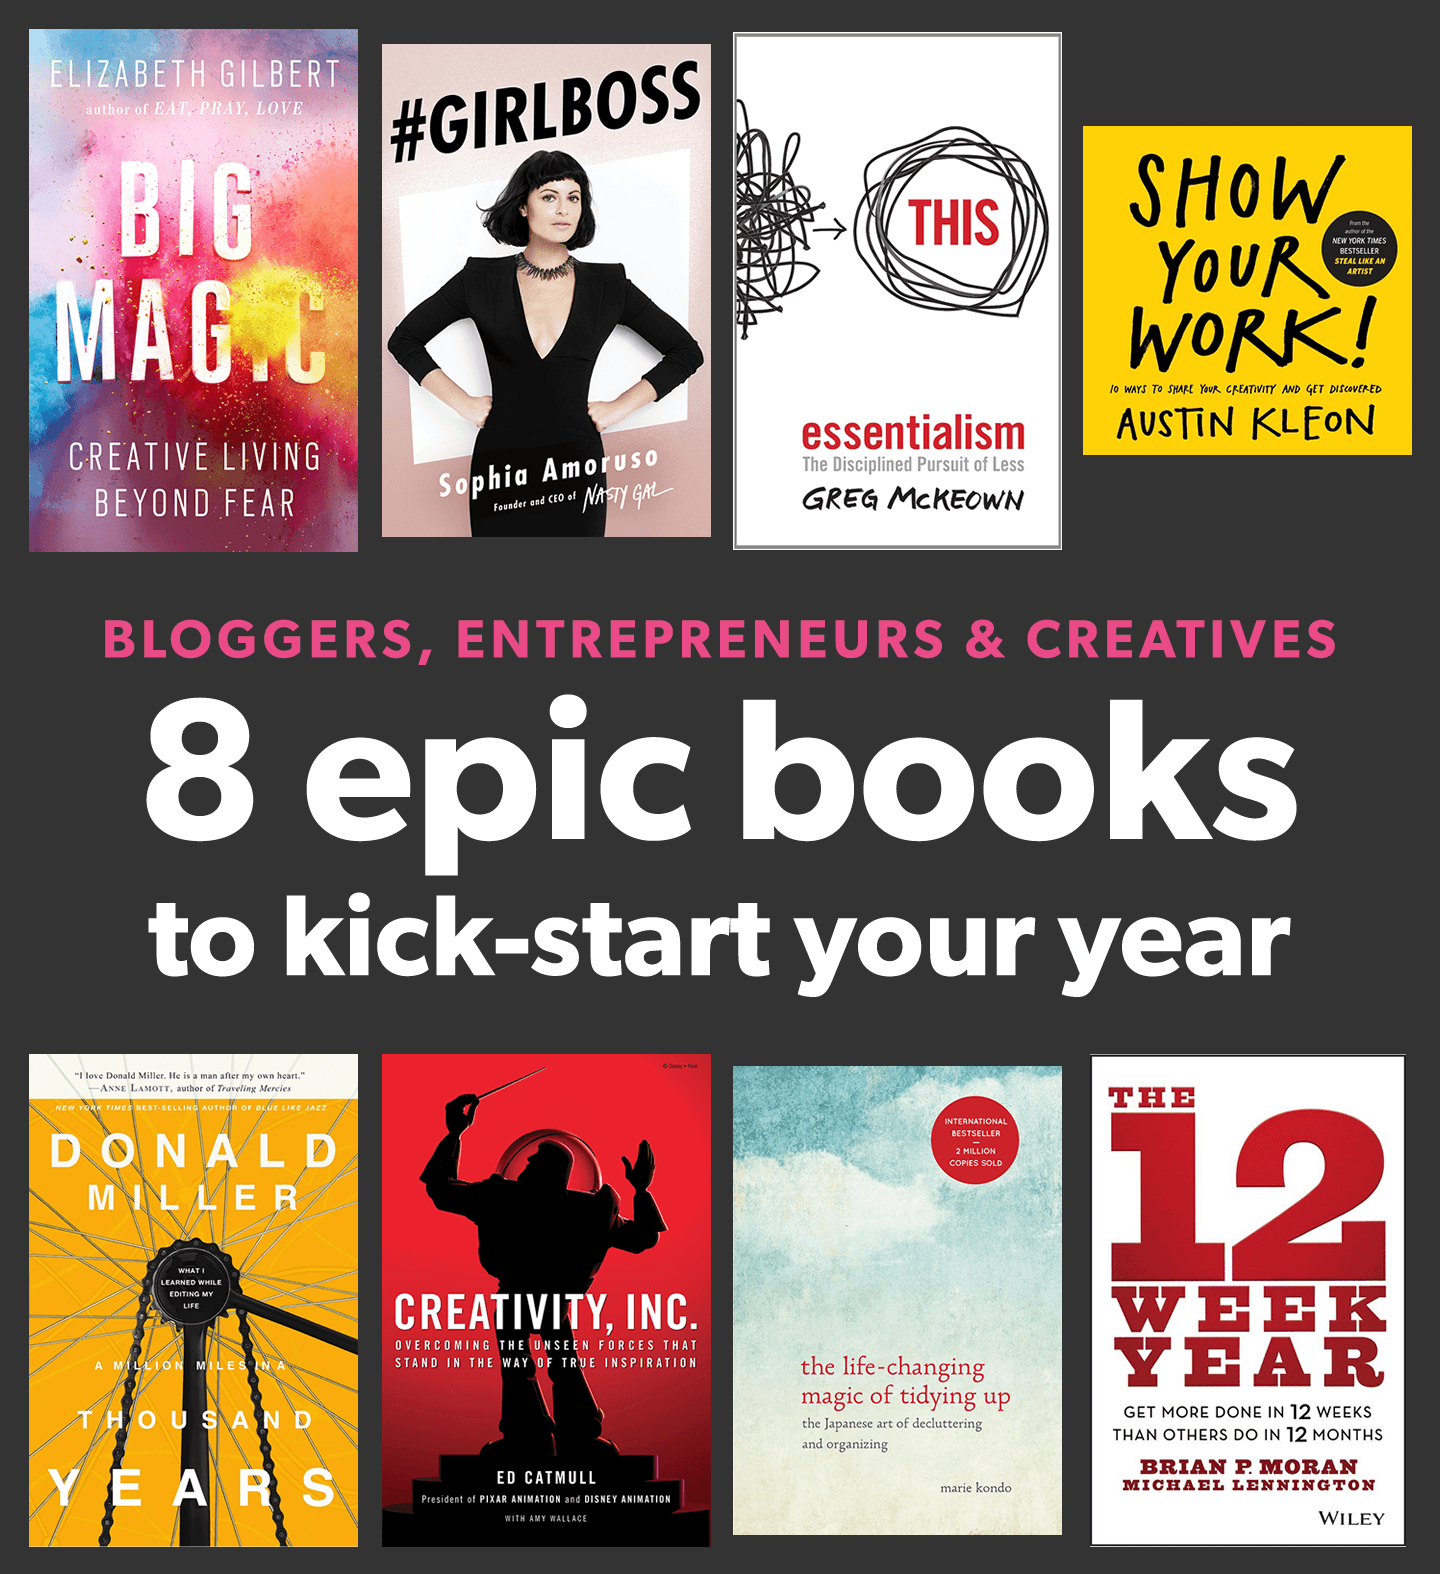 8 epic books for entrepreneurs, biz owners, creatives and bloggers to read to kick-start their year #books #business #creativity #inspiration